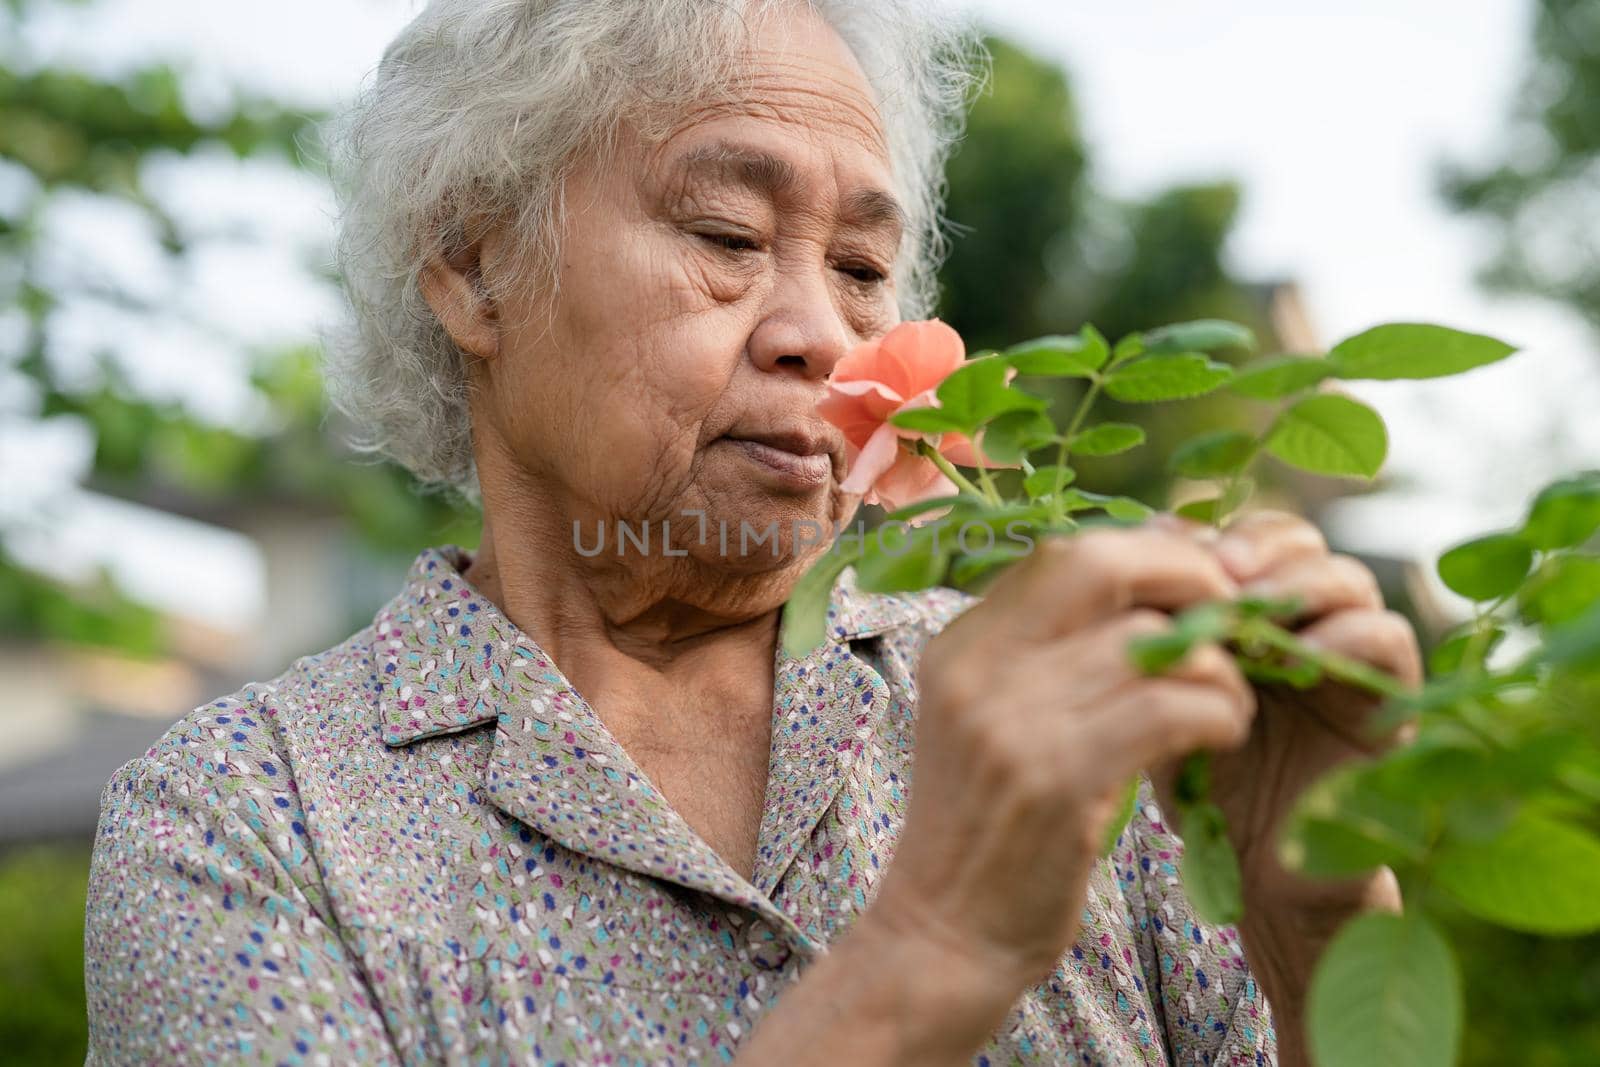 Asian senior or elderly old lady woman with pinkish orange rose flower in the sunny garden.